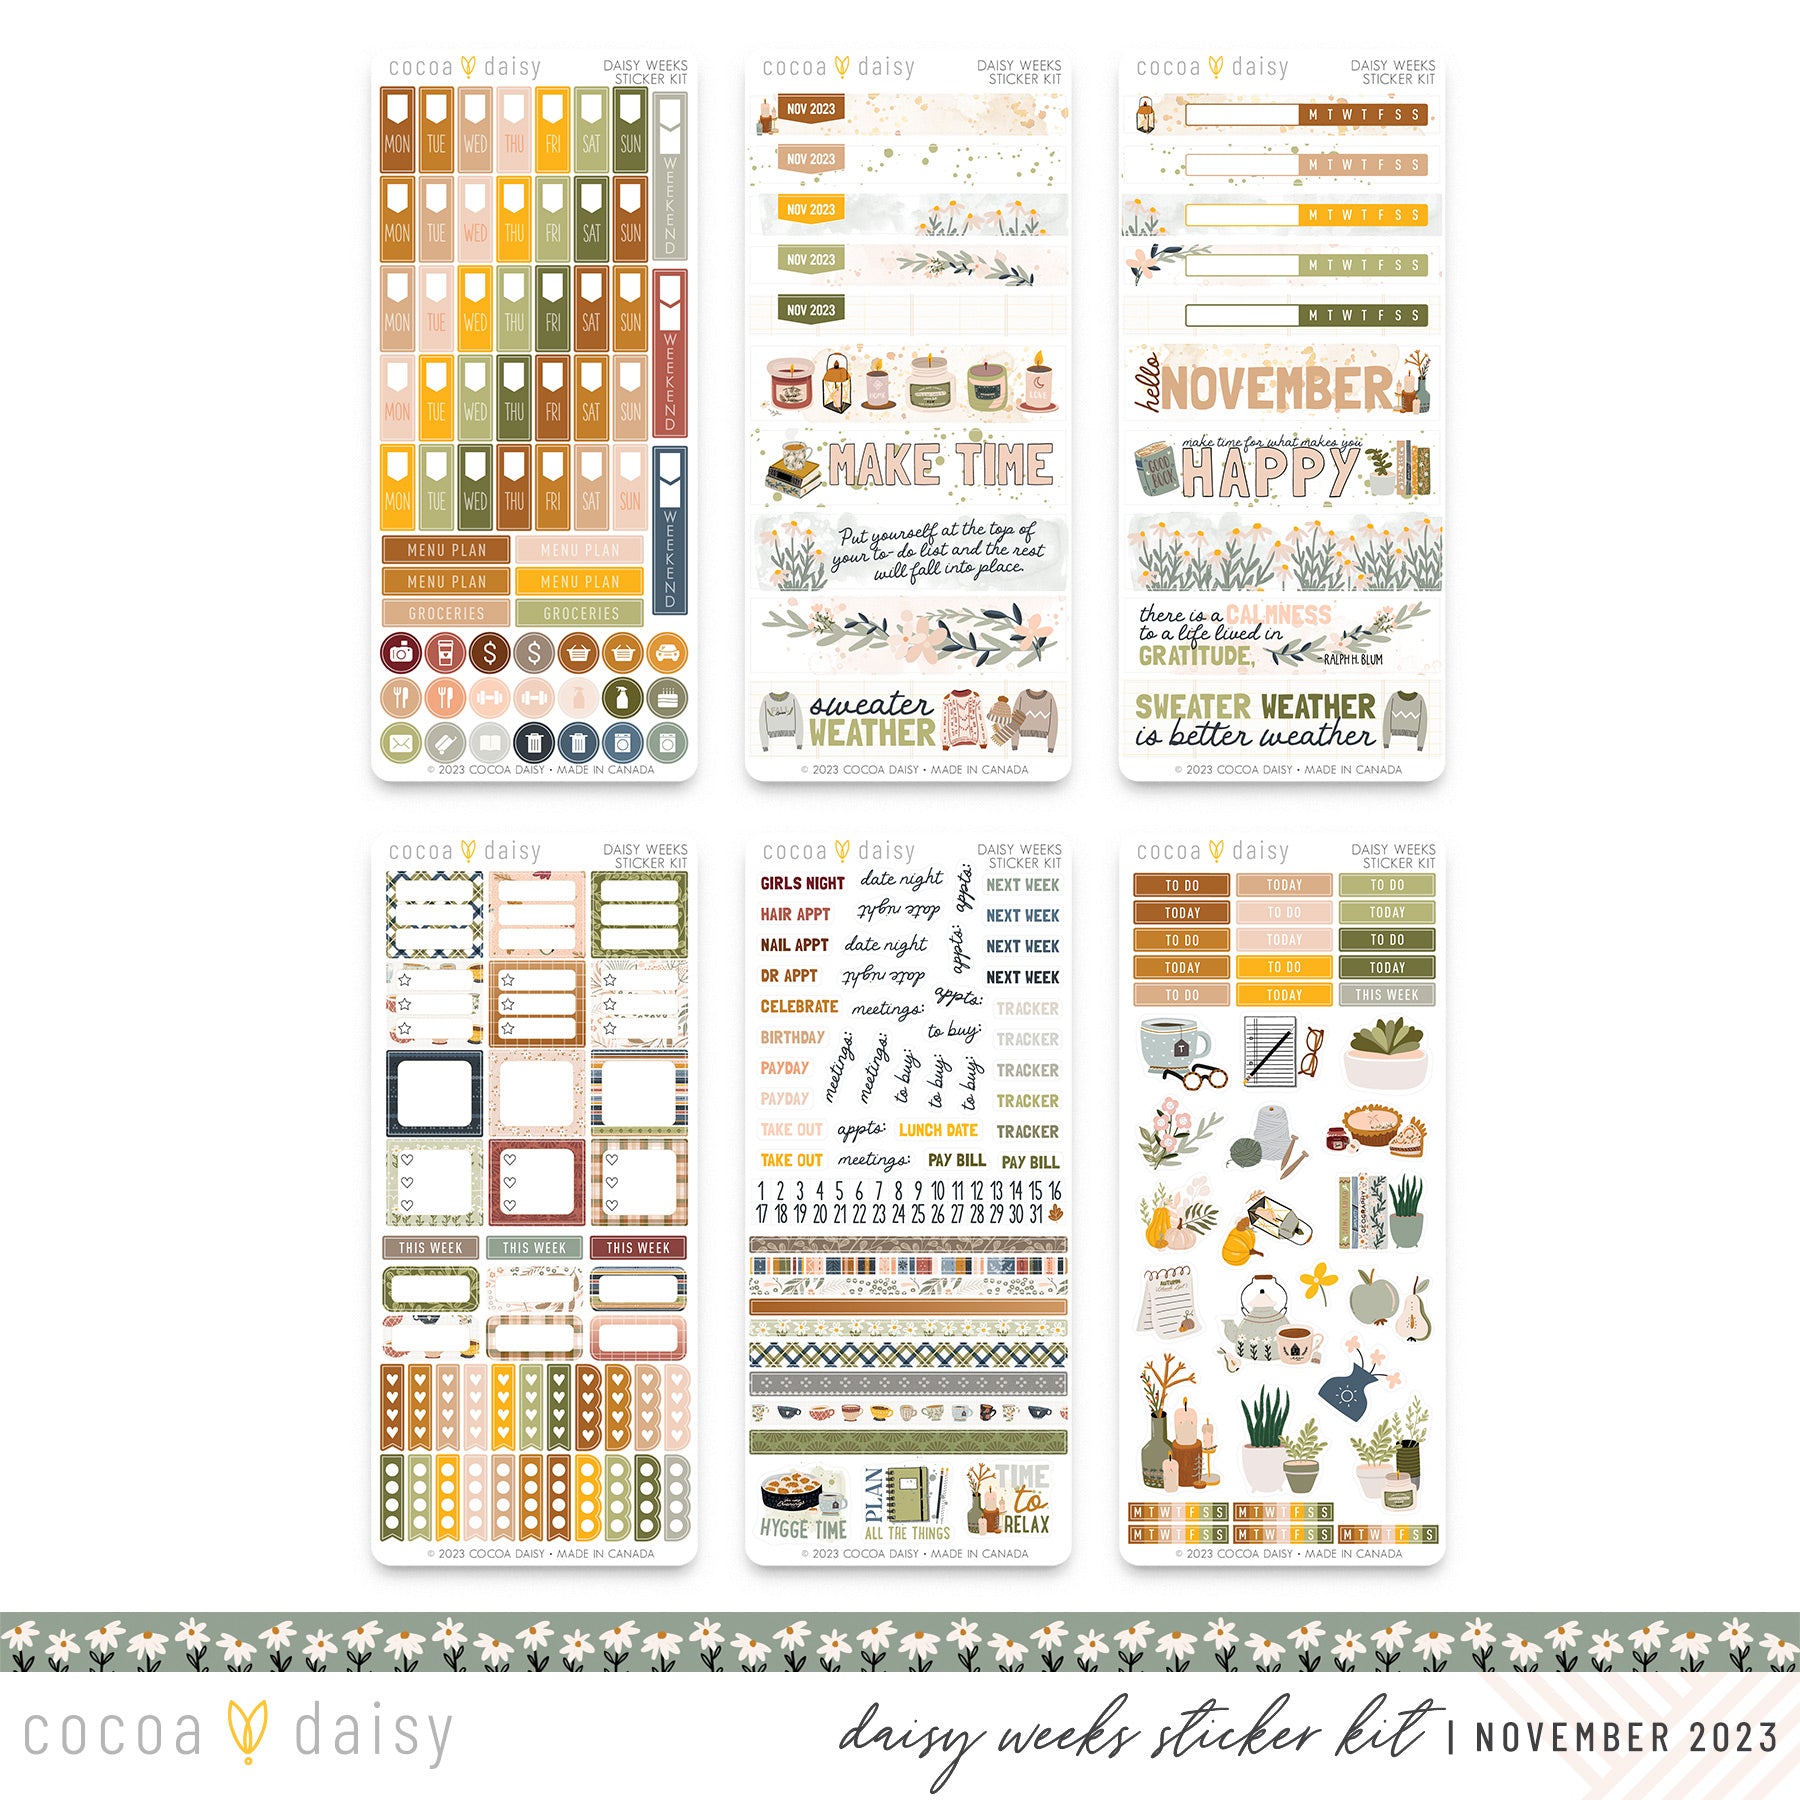 Cocoa Daisy Exclusive Days of the Week Sticker Sheet